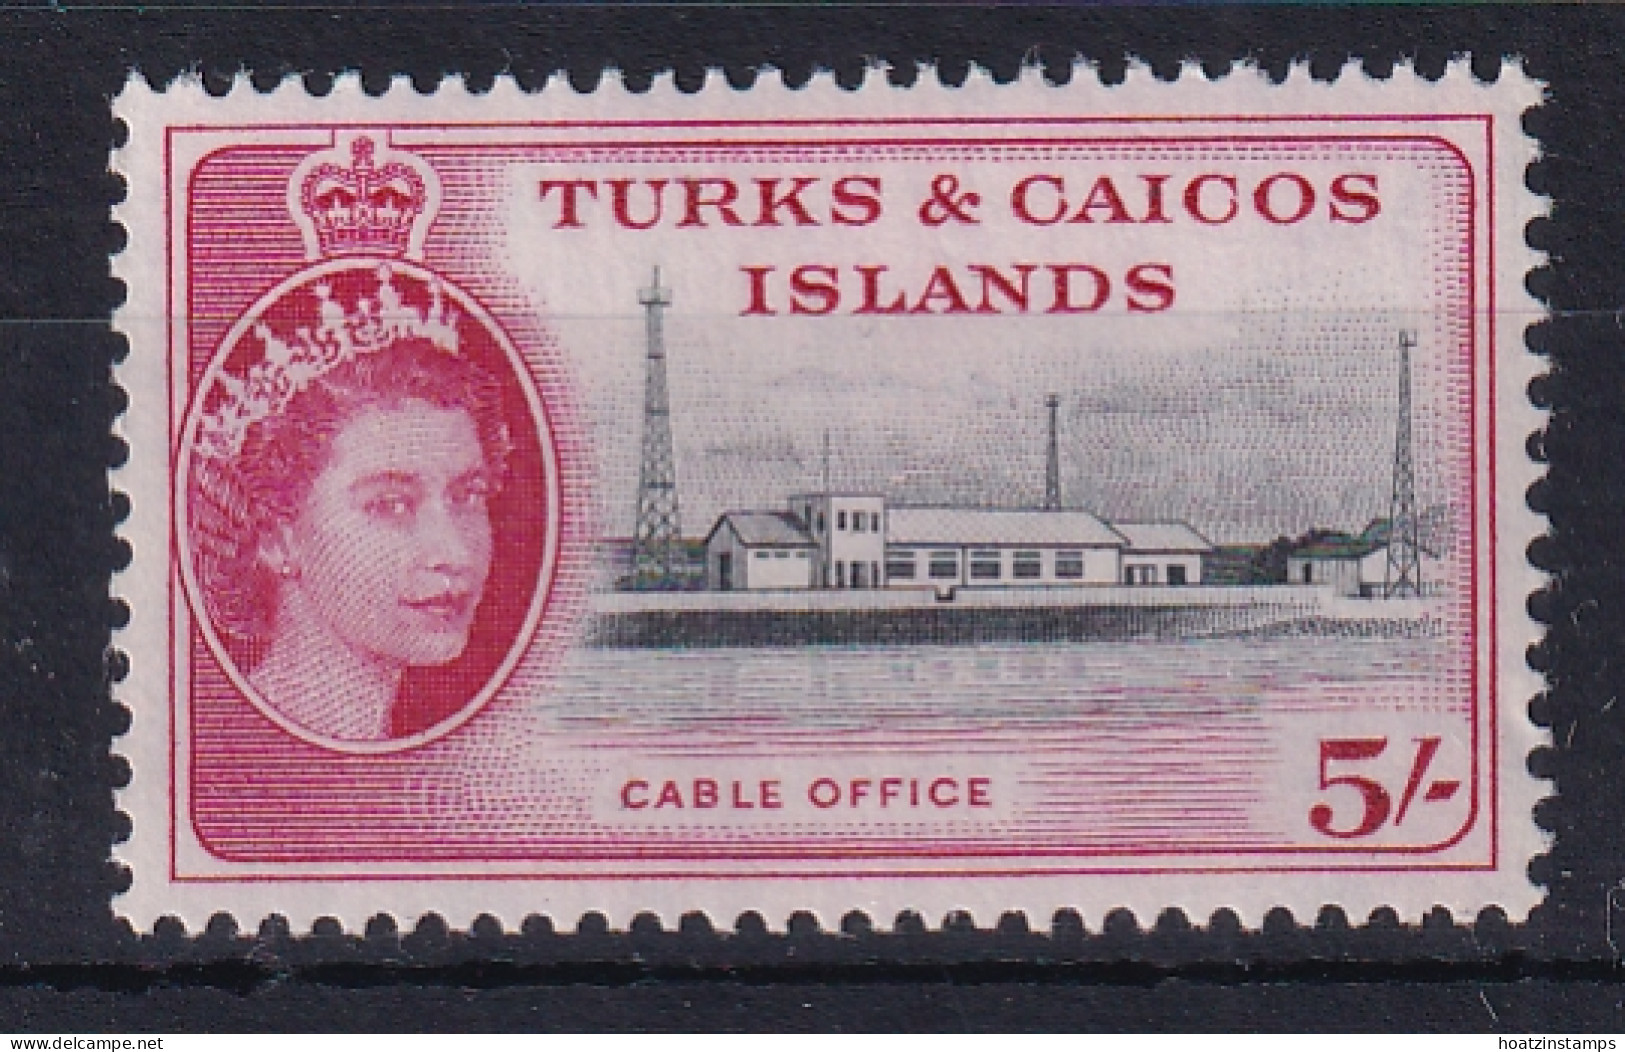 Turks & Caicos Is: 1957   QE II - Pictorial   SG249    5/-      MH - Turks And Caicos